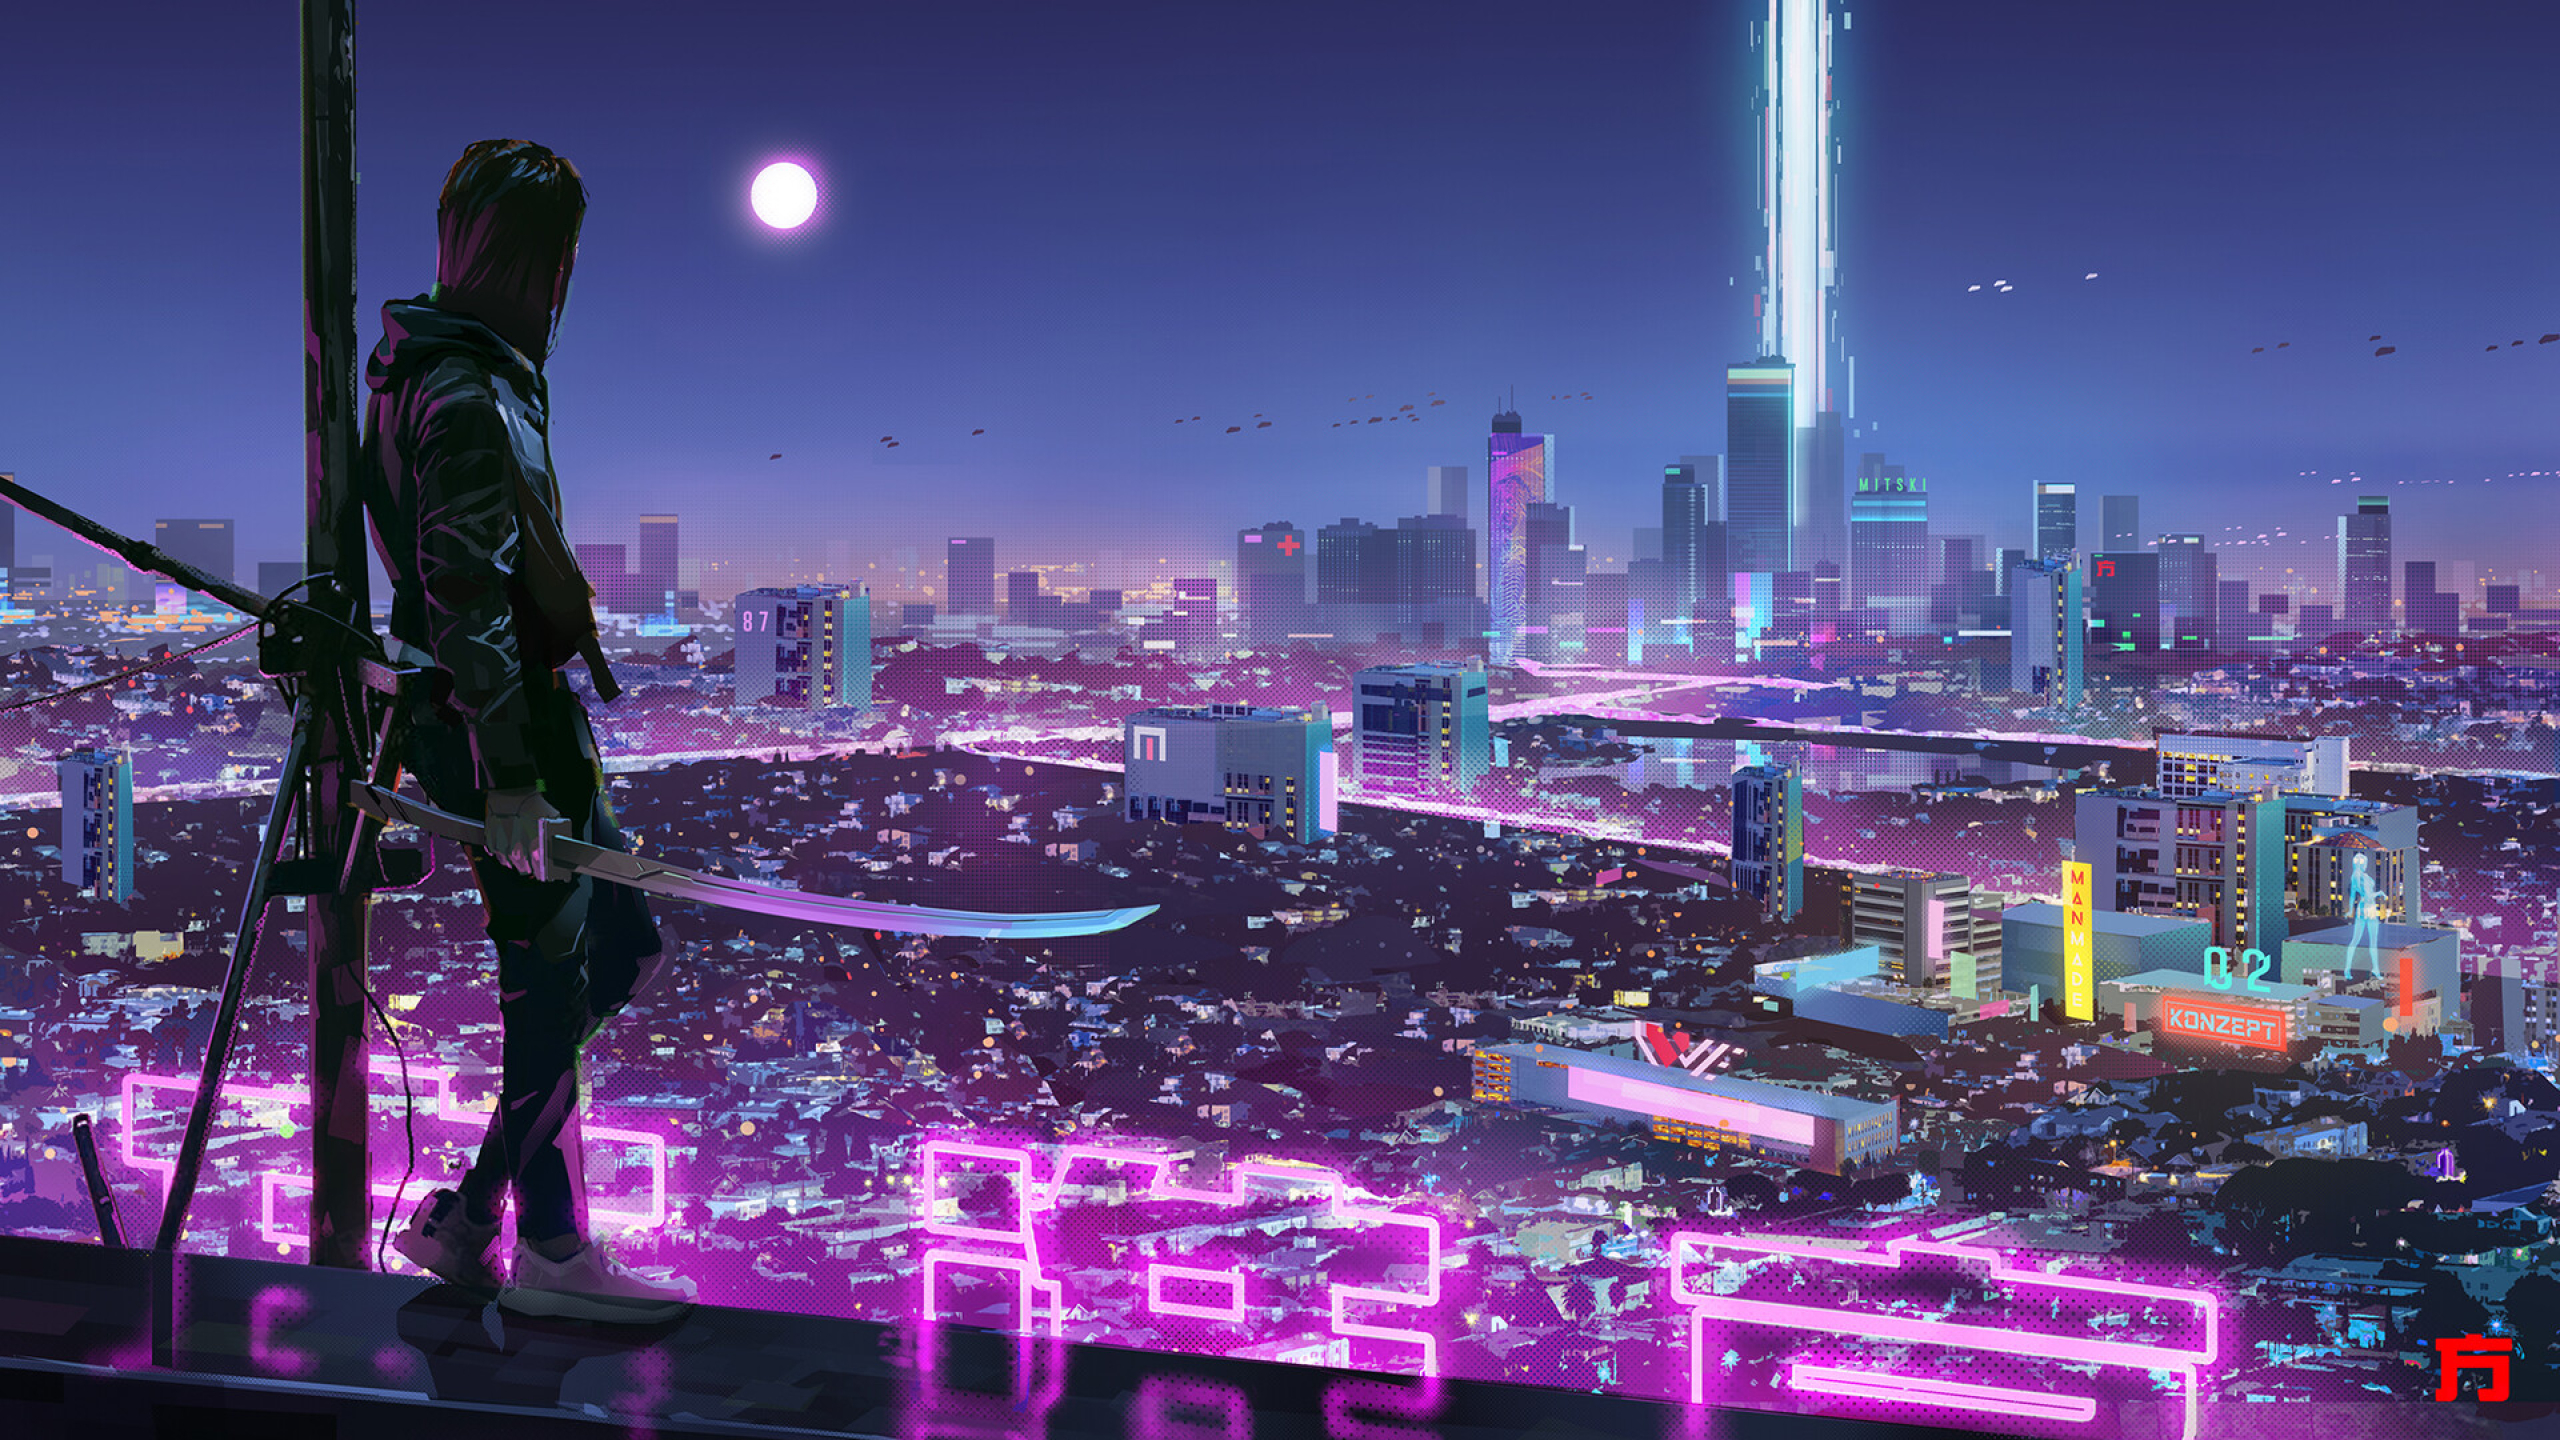 2560x1440 Warrior Girl In Cyberpunk City 1440p Resolution Wallpaper Hd Artist 4k Wallpapers Images Photos And Background